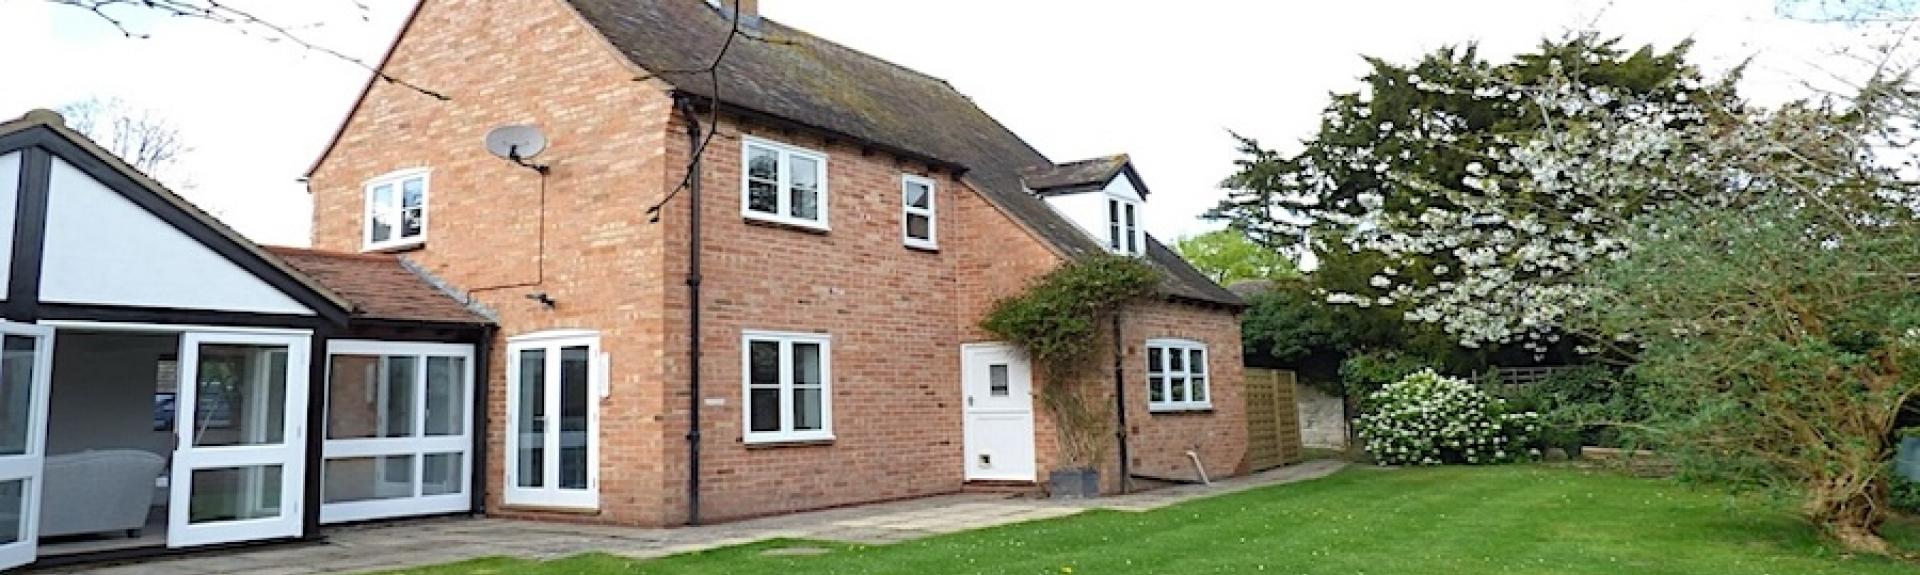 A brick-built holiday home with single storey extensions and a large, tree-lined and well-mown lawn